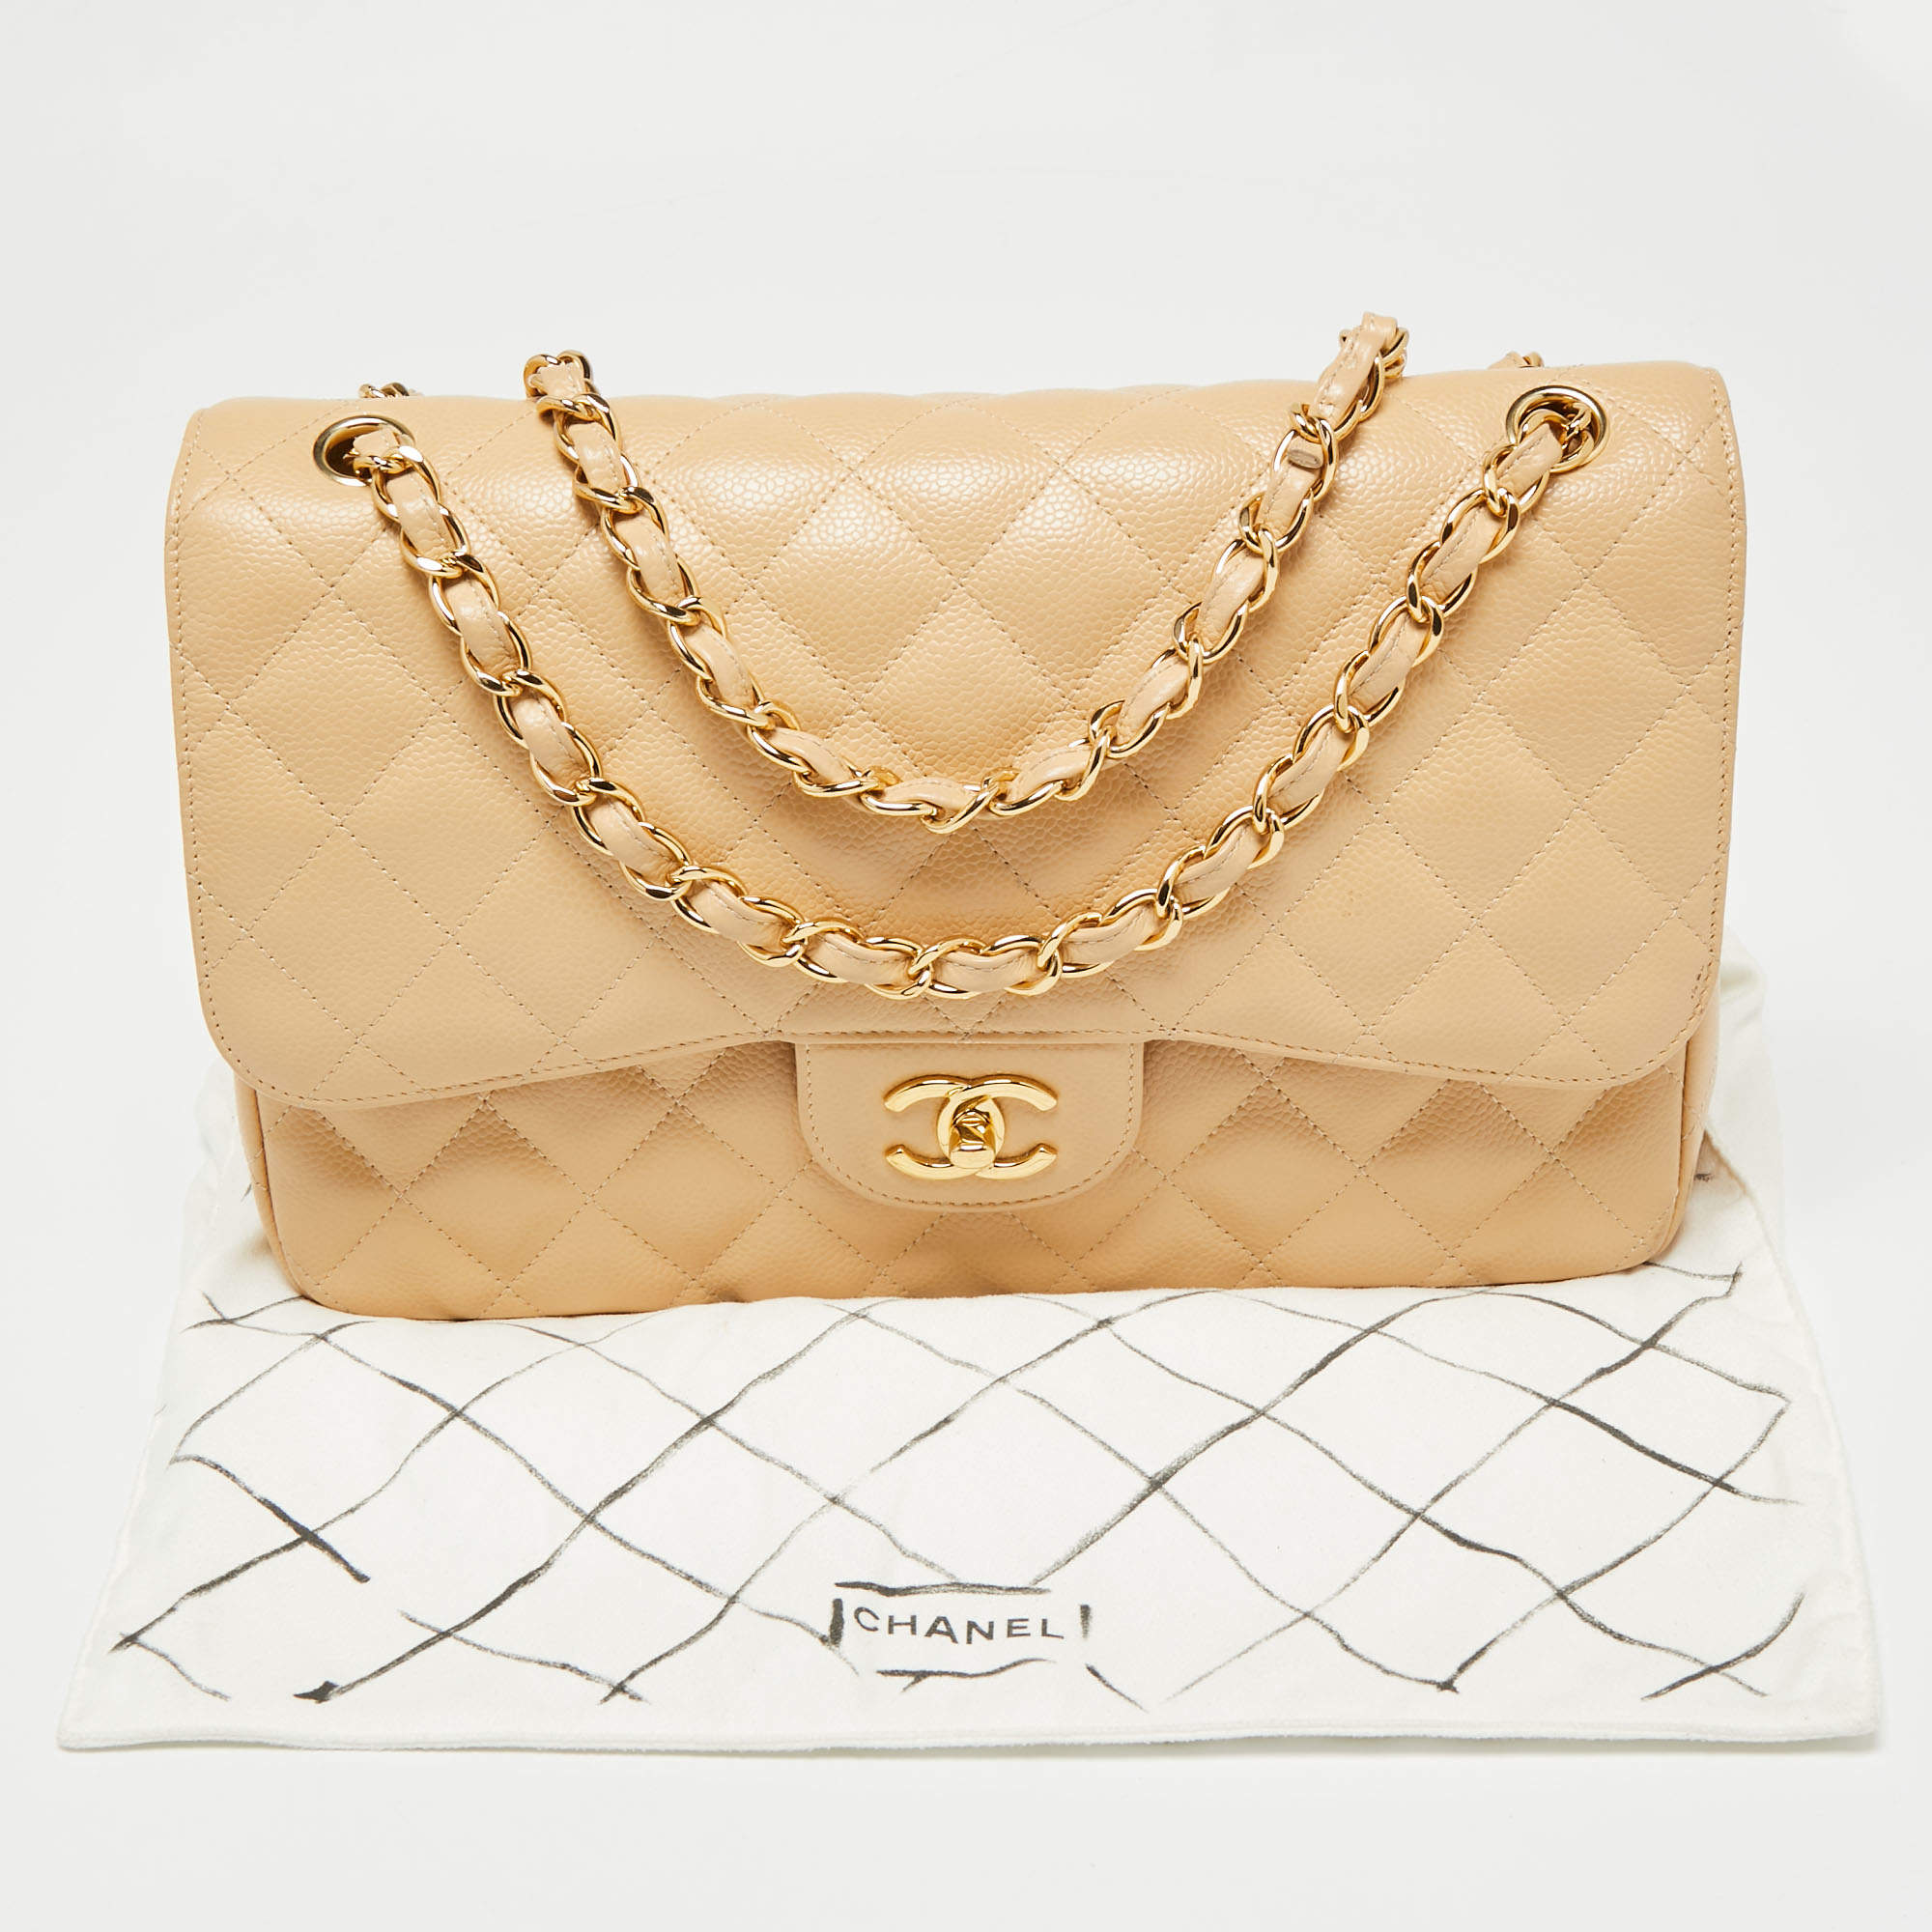 Chanel Beige Quilted Caviar Leather Jumbo Classic Double Flap Bag Chanel